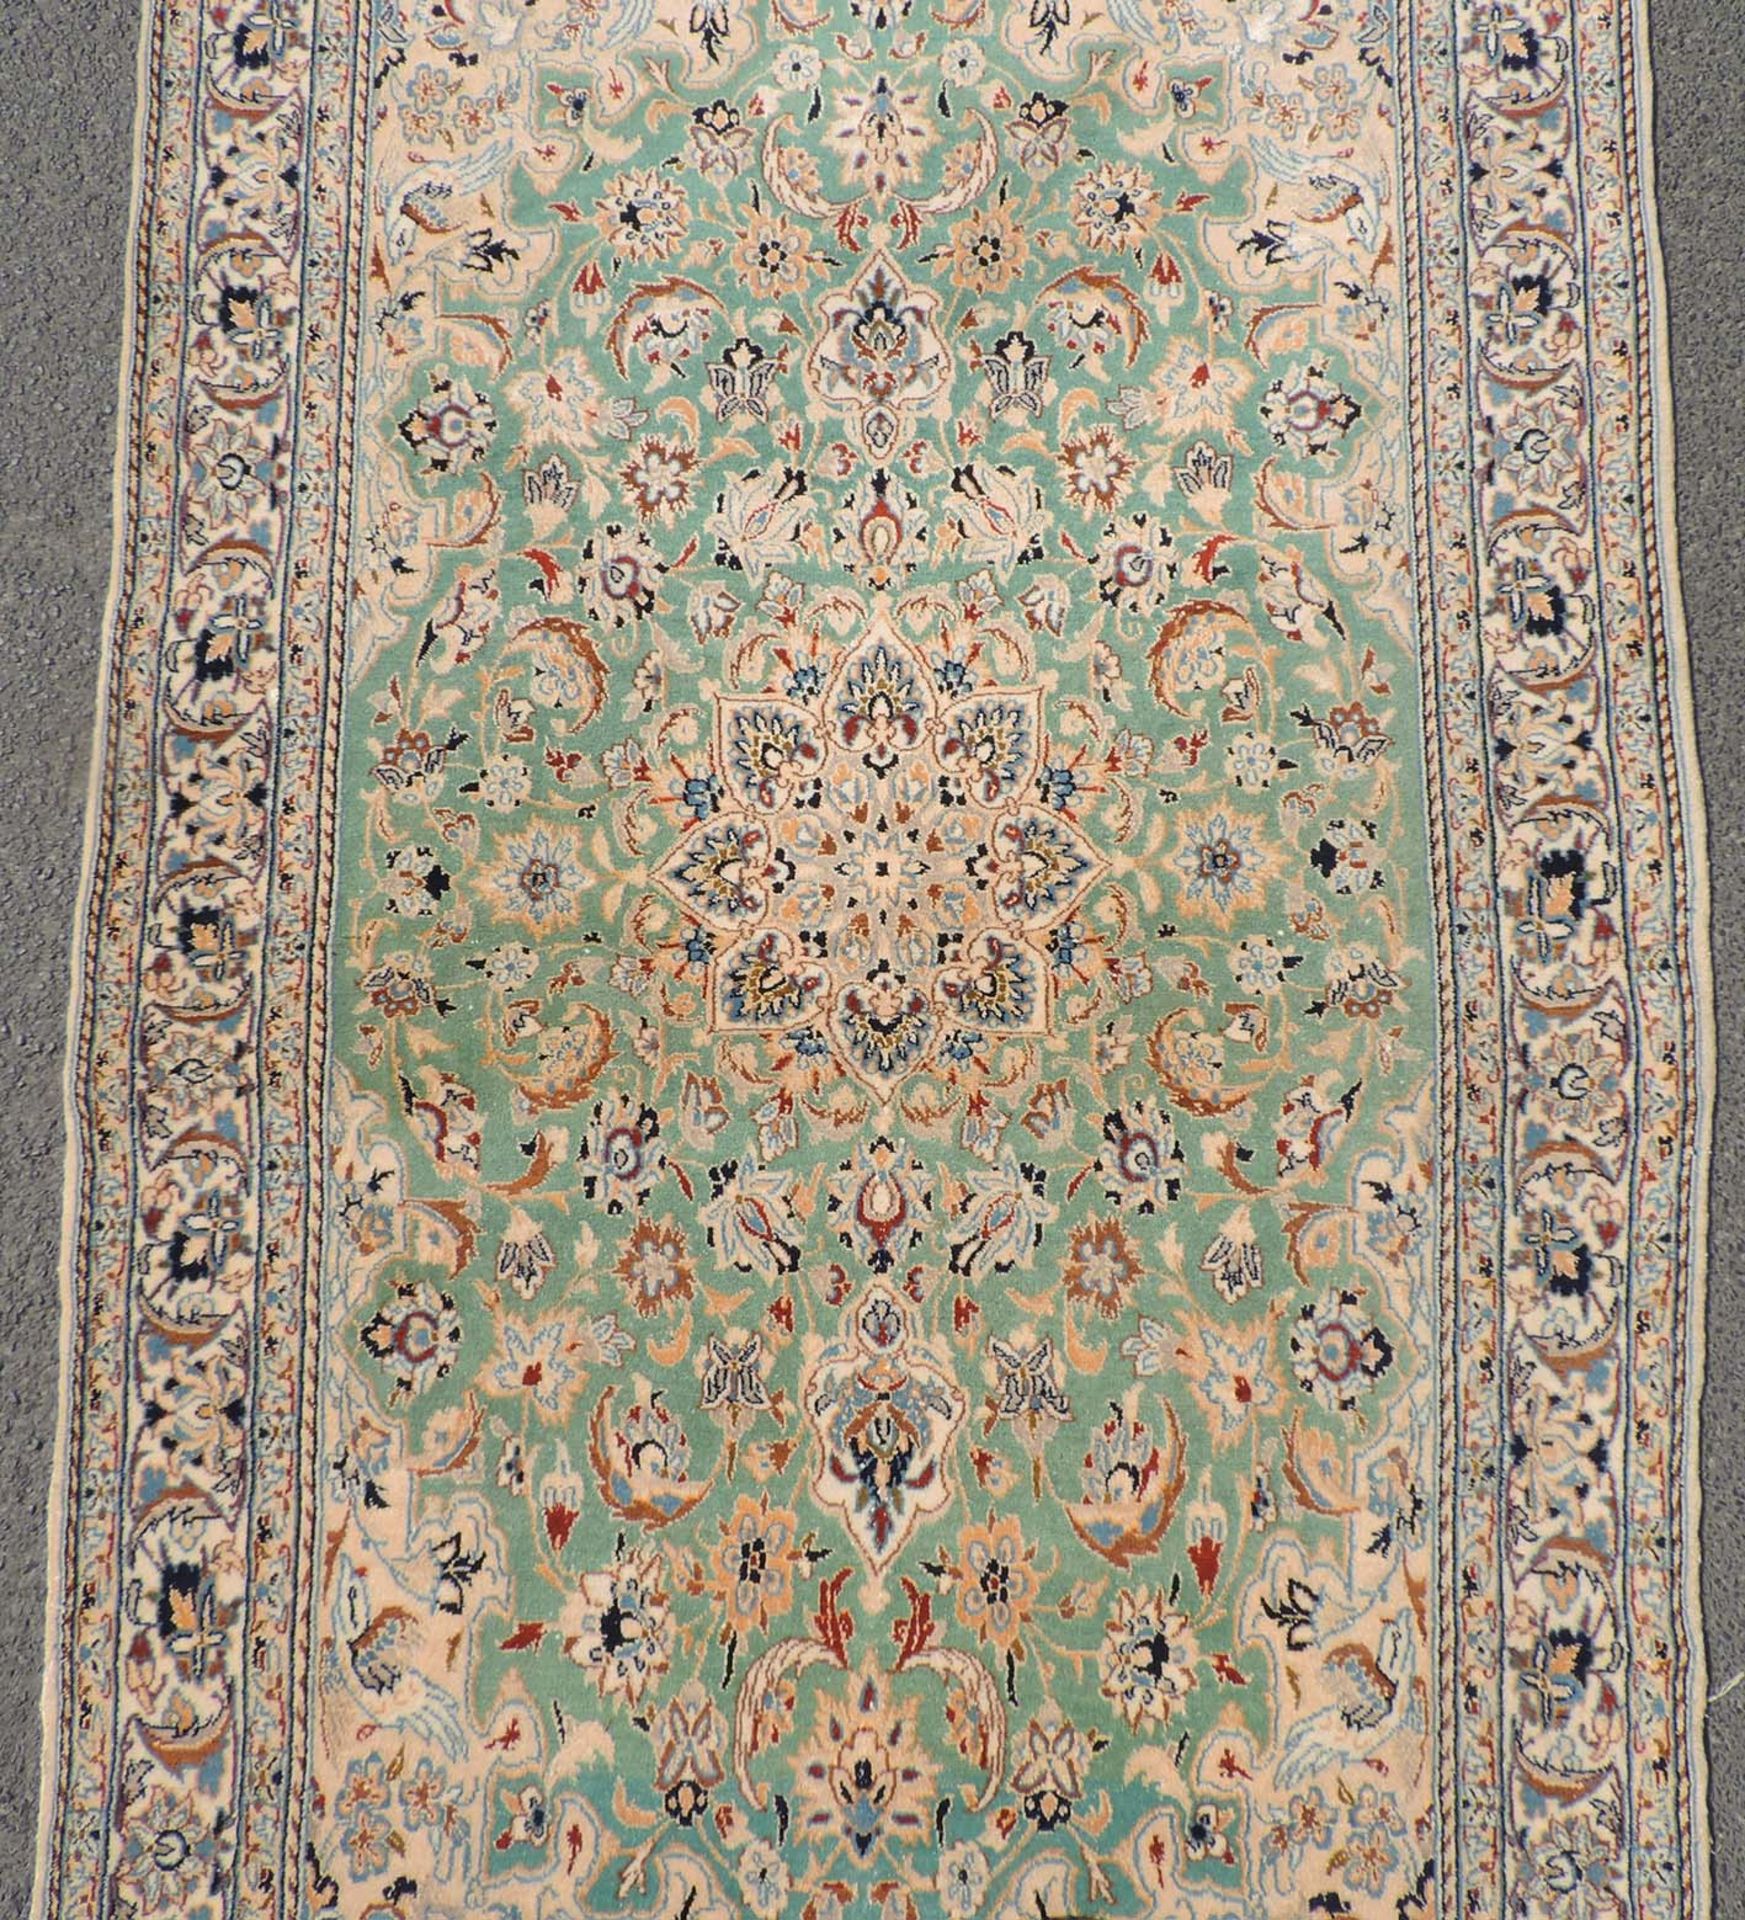 Nain Persian rug. Iran. Very fine weave.214 cm x 113 cm. Knotted by hand. Cork wool and silk on - Bild 3 aus 6